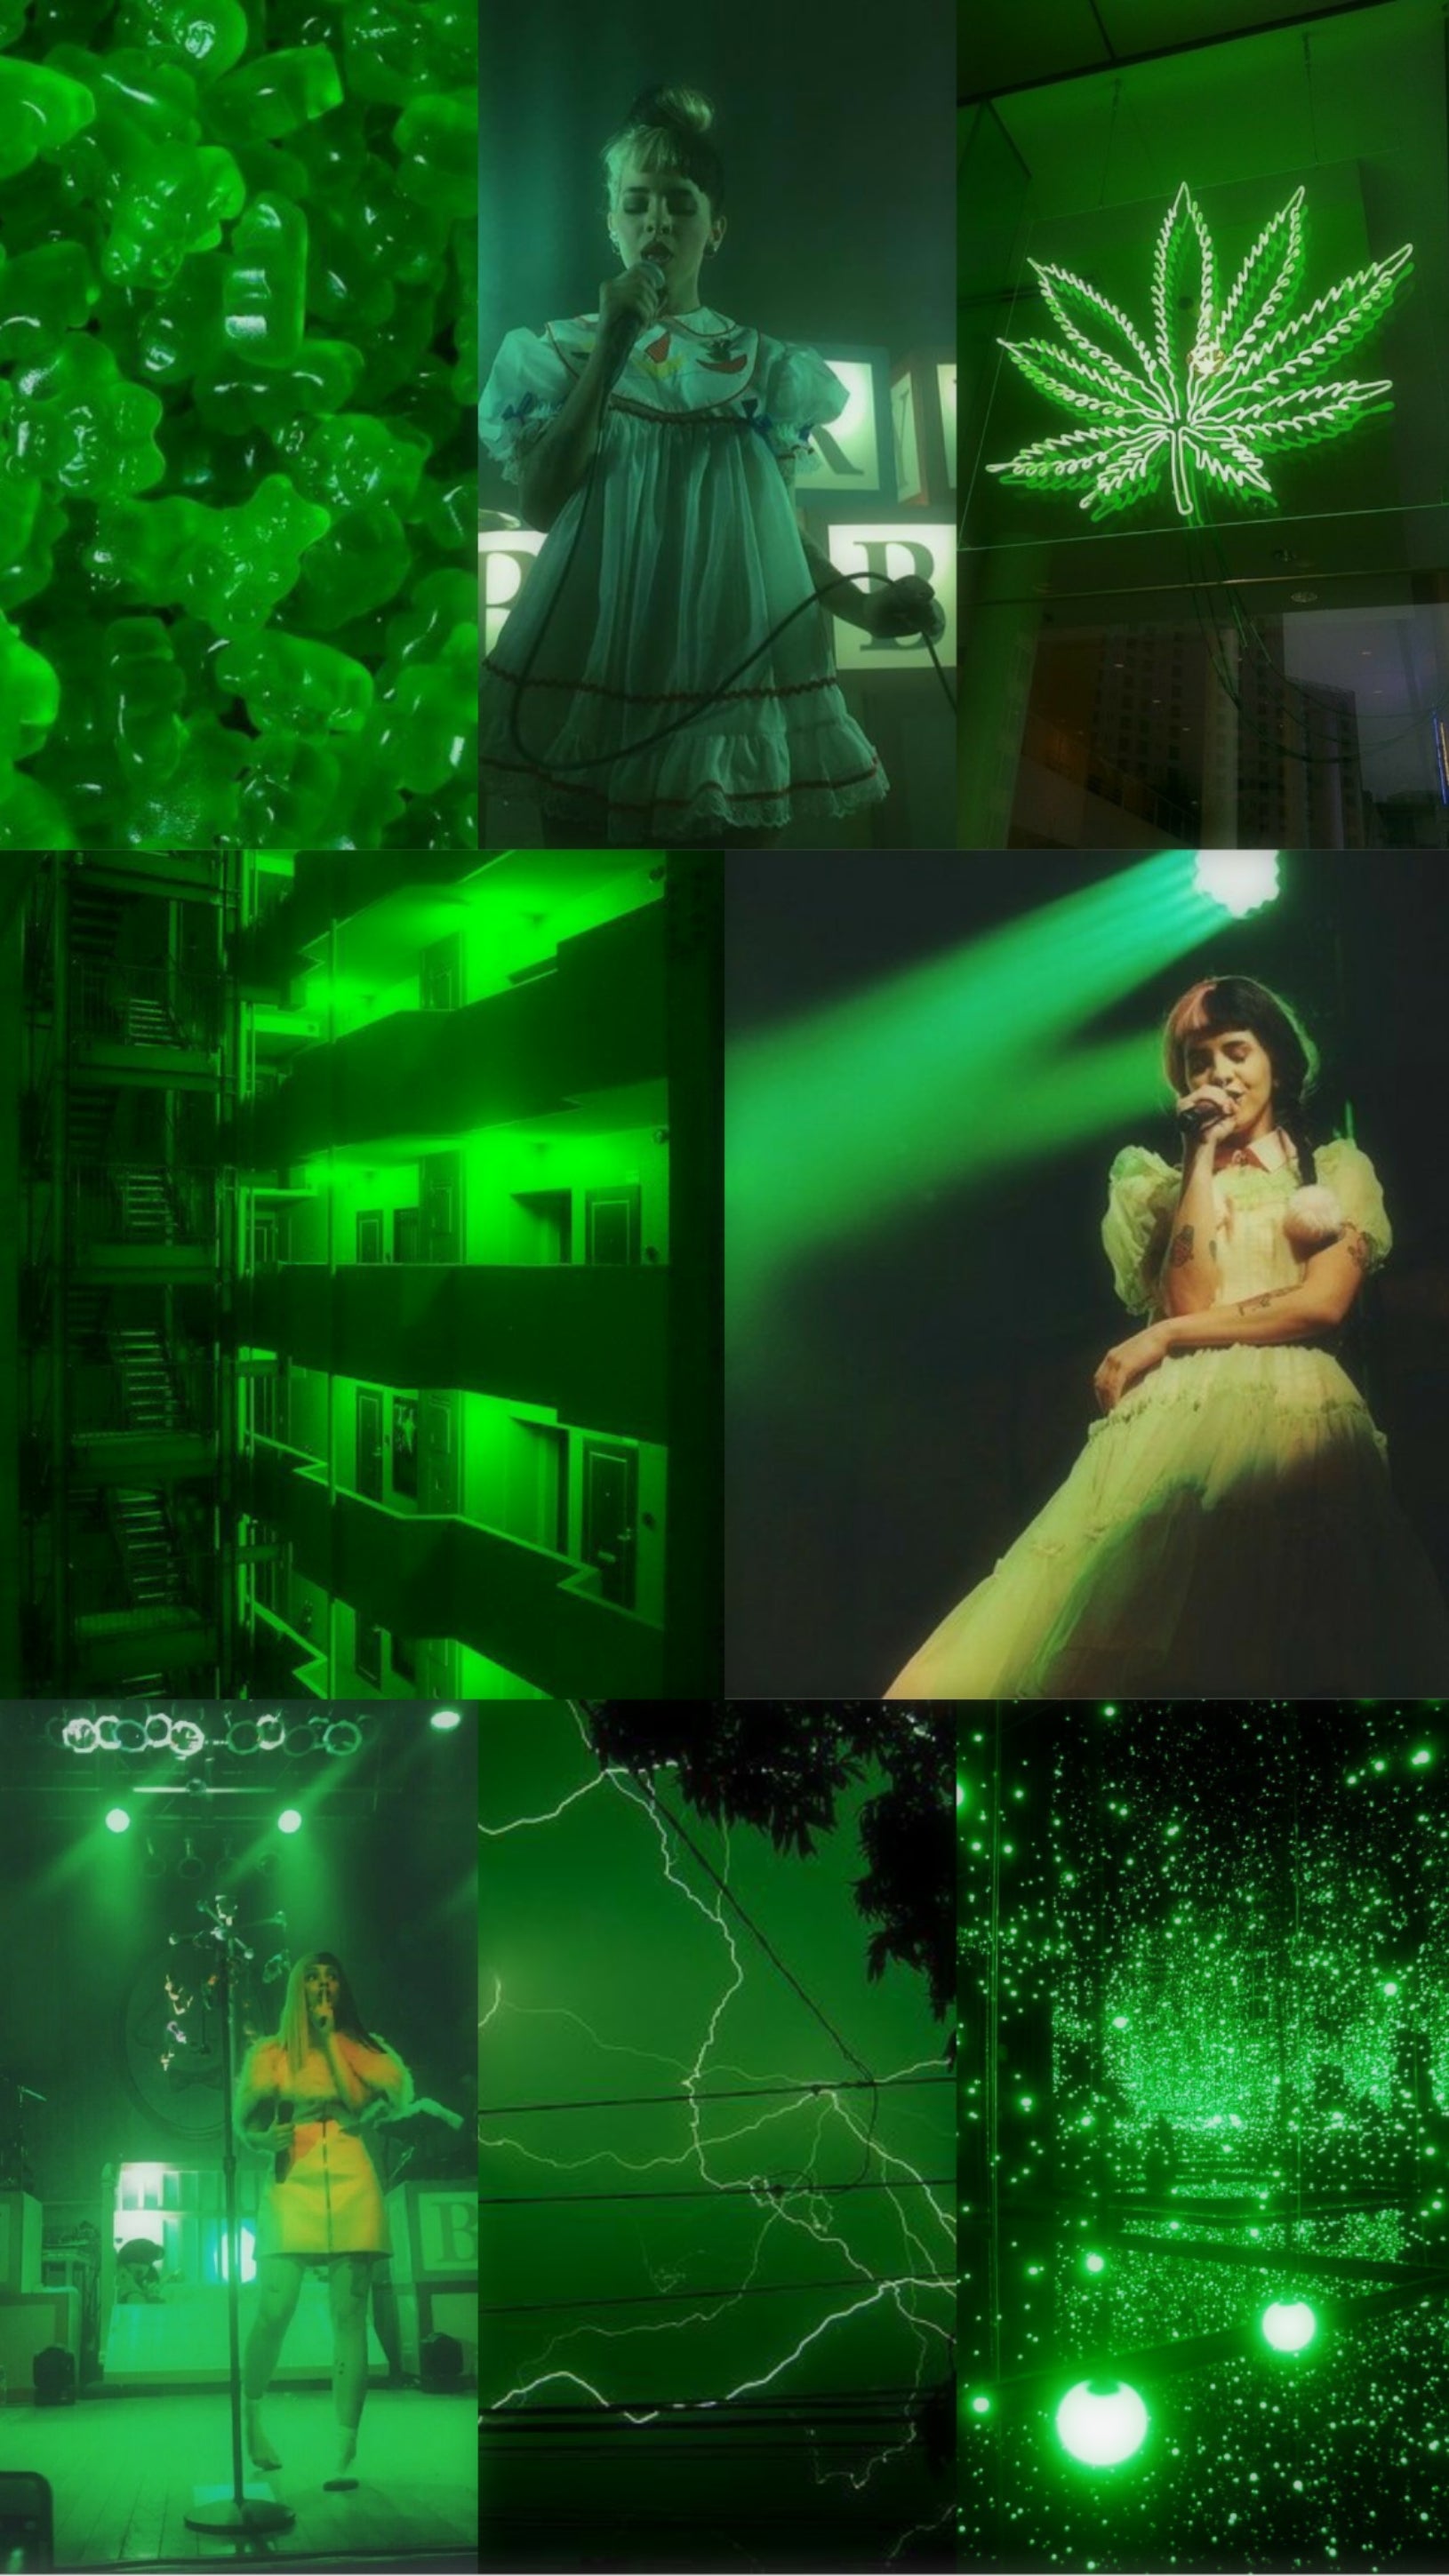 A collage of pictures with green lighting - Melanie Martinez